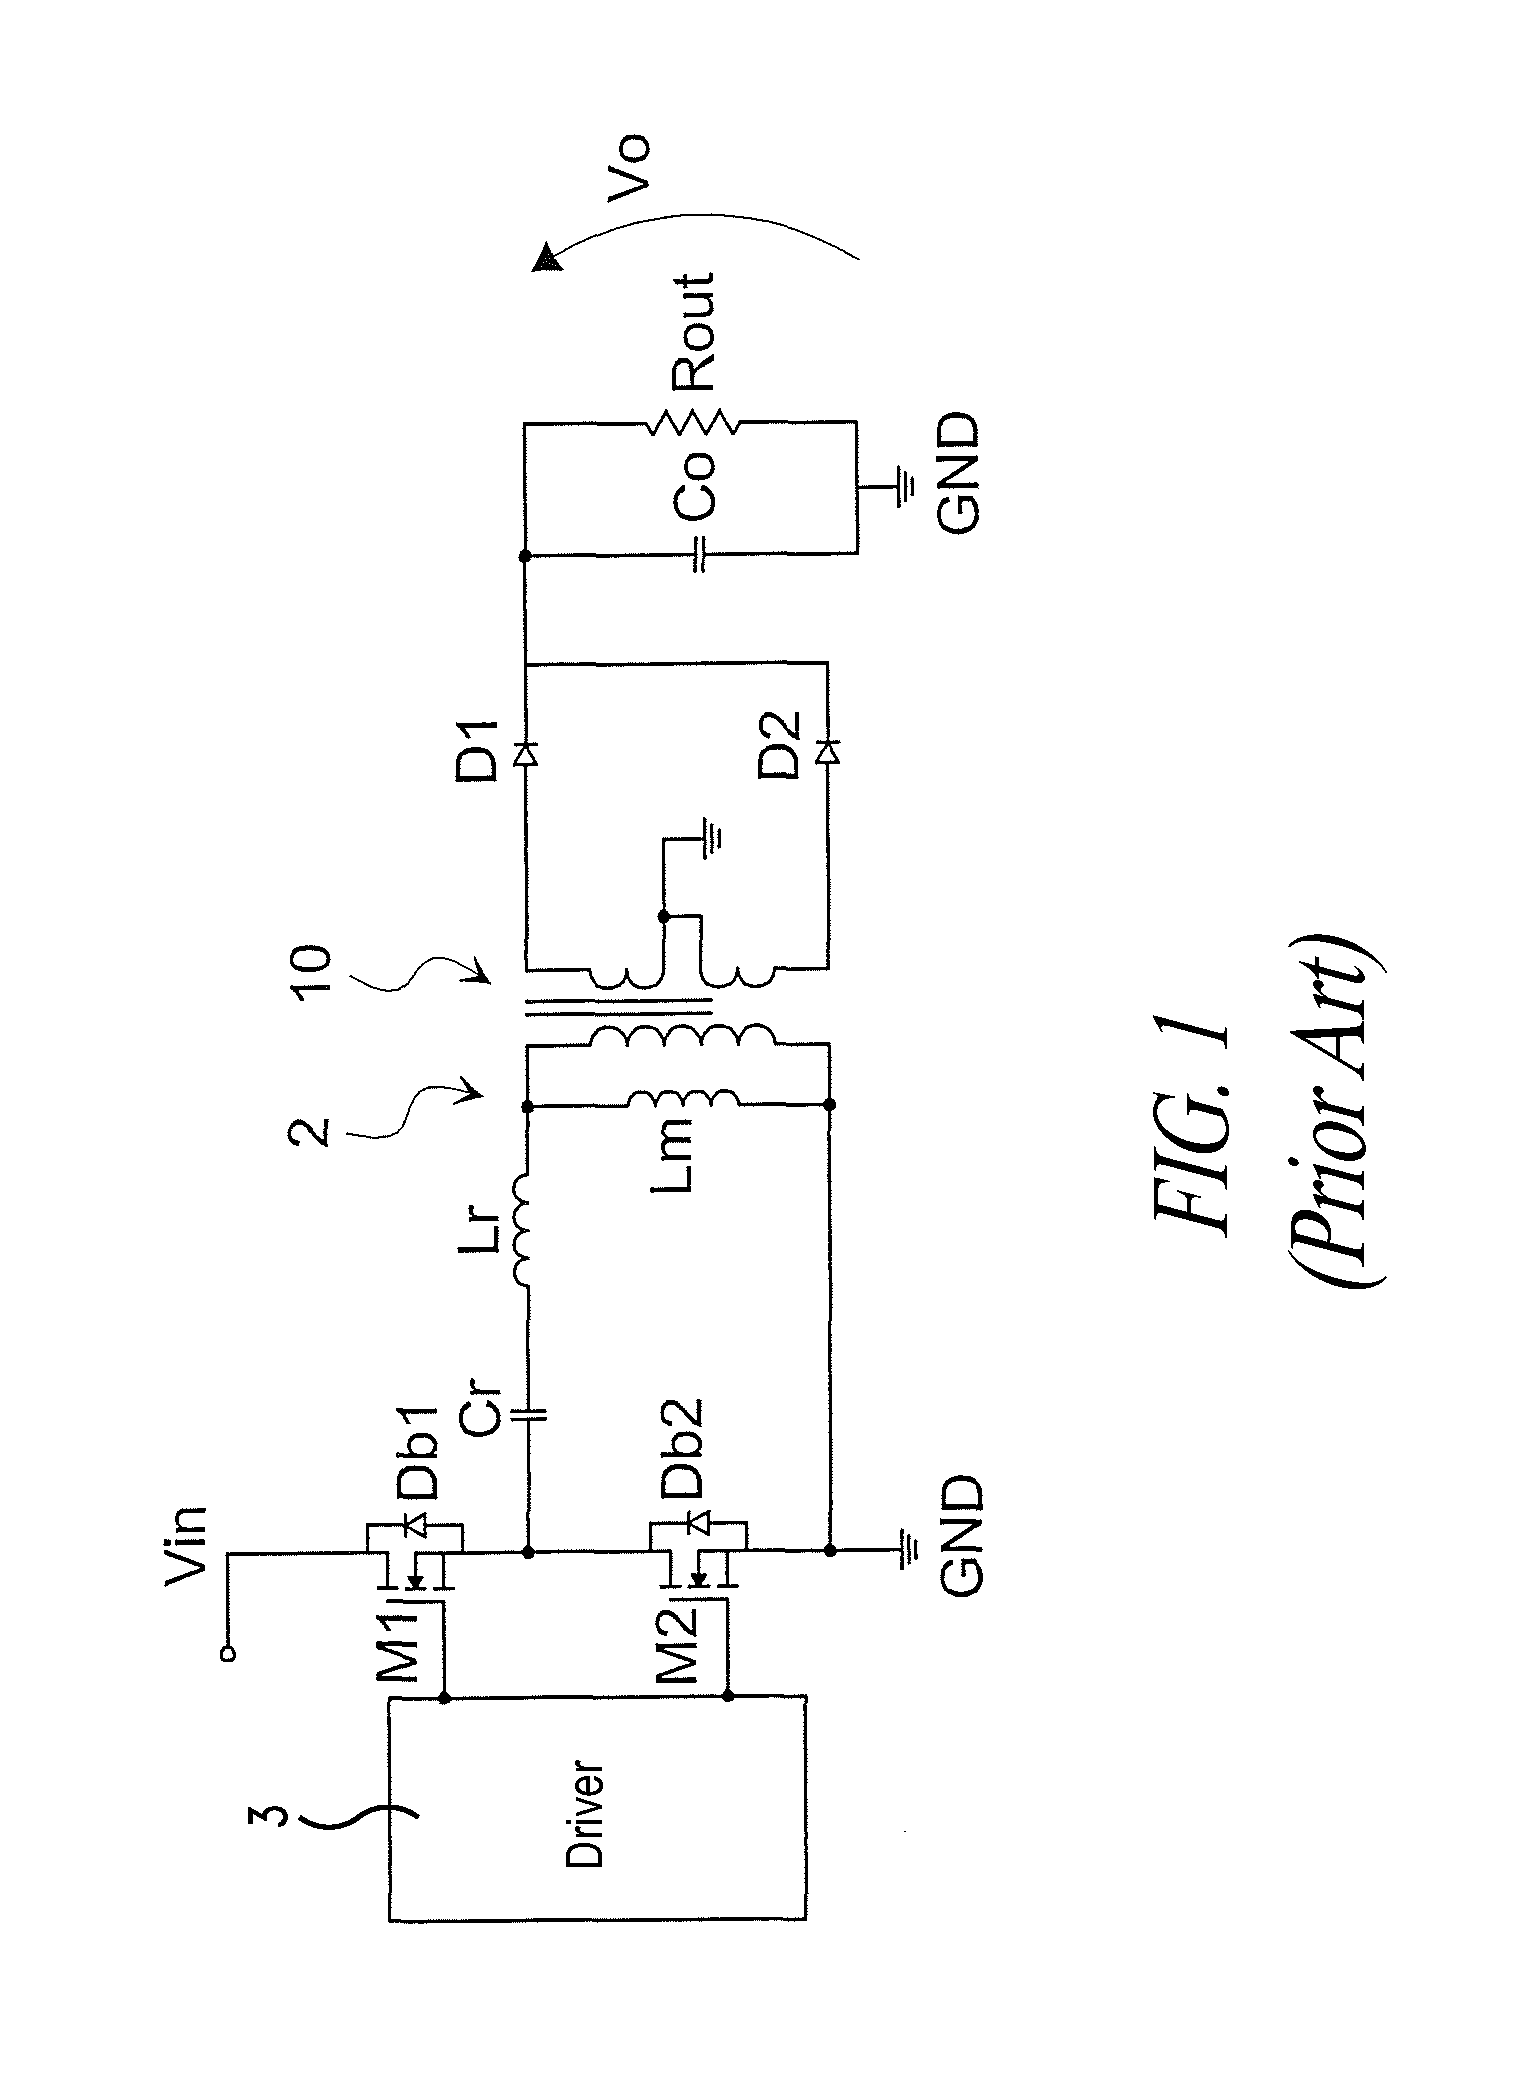 Control method for rectifier of switching converters